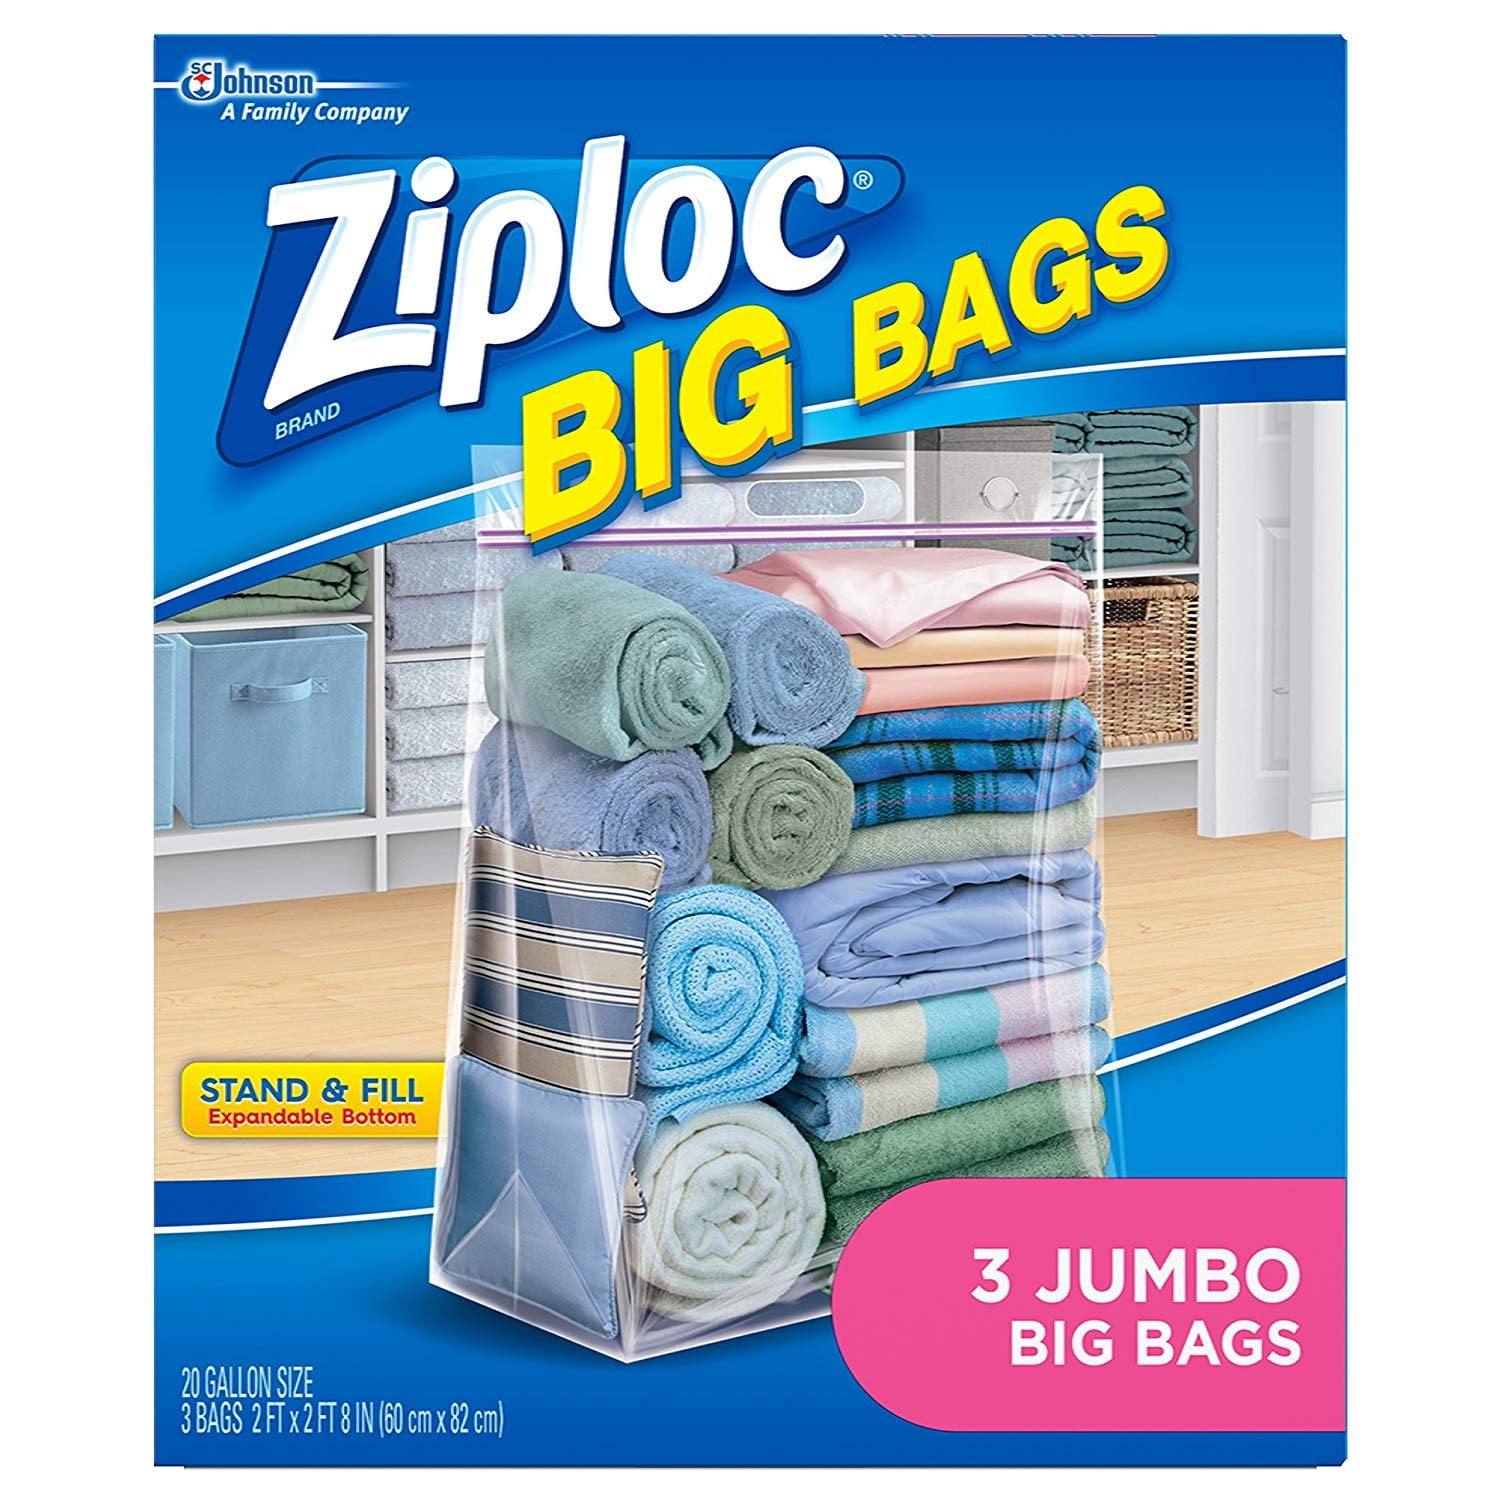 Ziploc 02204 Gallon Slide Stor Bag 15 Pack: Covered Storage Large Over 2  Liters or 68 Ounces (025700022046-2)